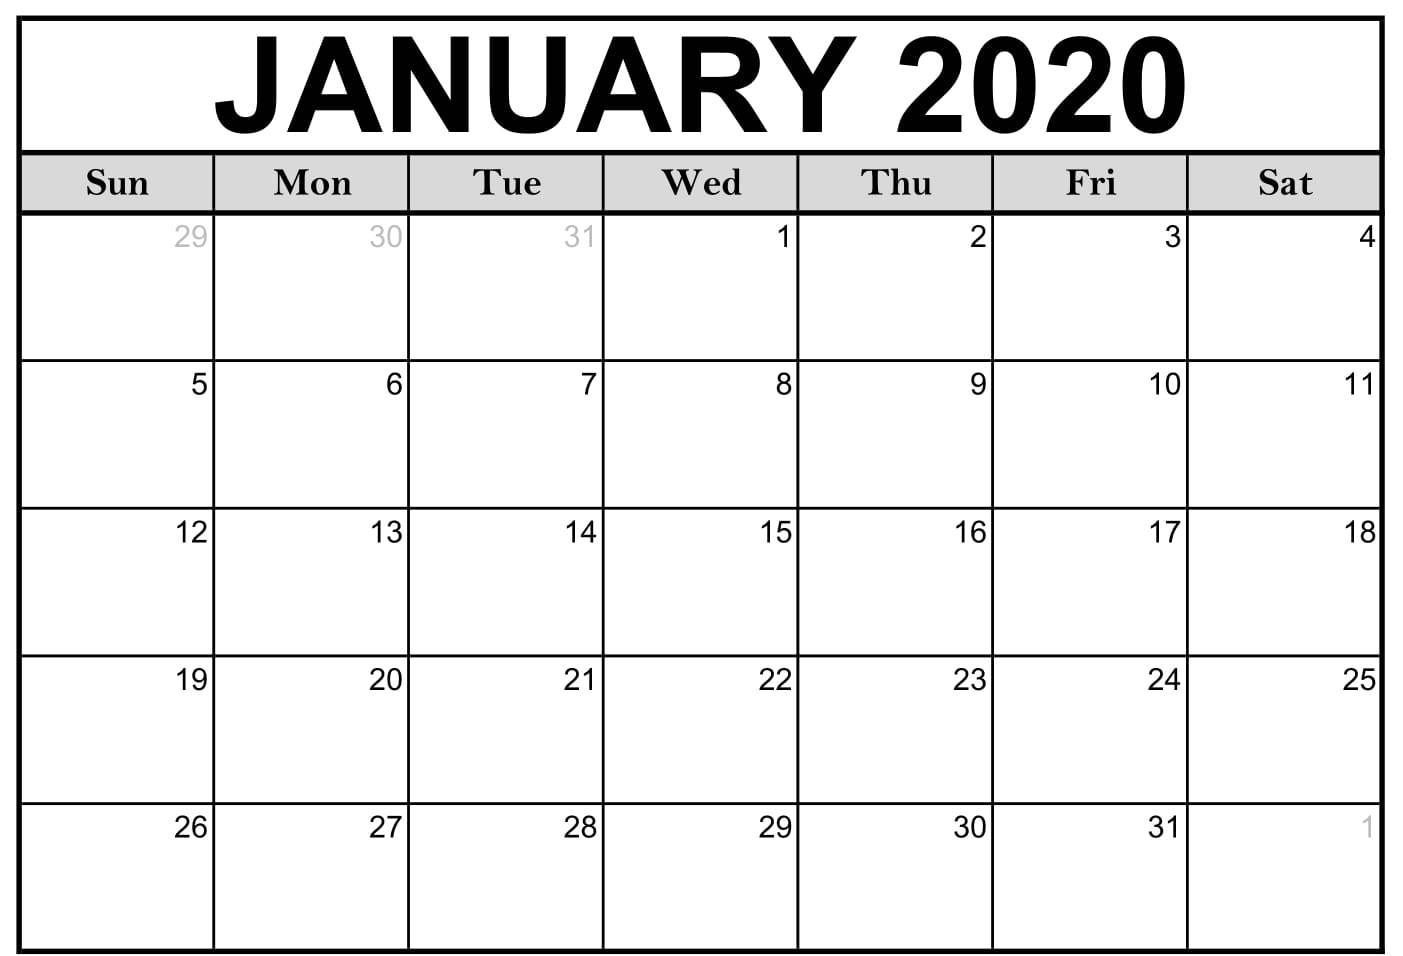 Exceptional Free Very Large Squares Blank Printable Calendar 2020 throughout Navy Calendar Squares Template